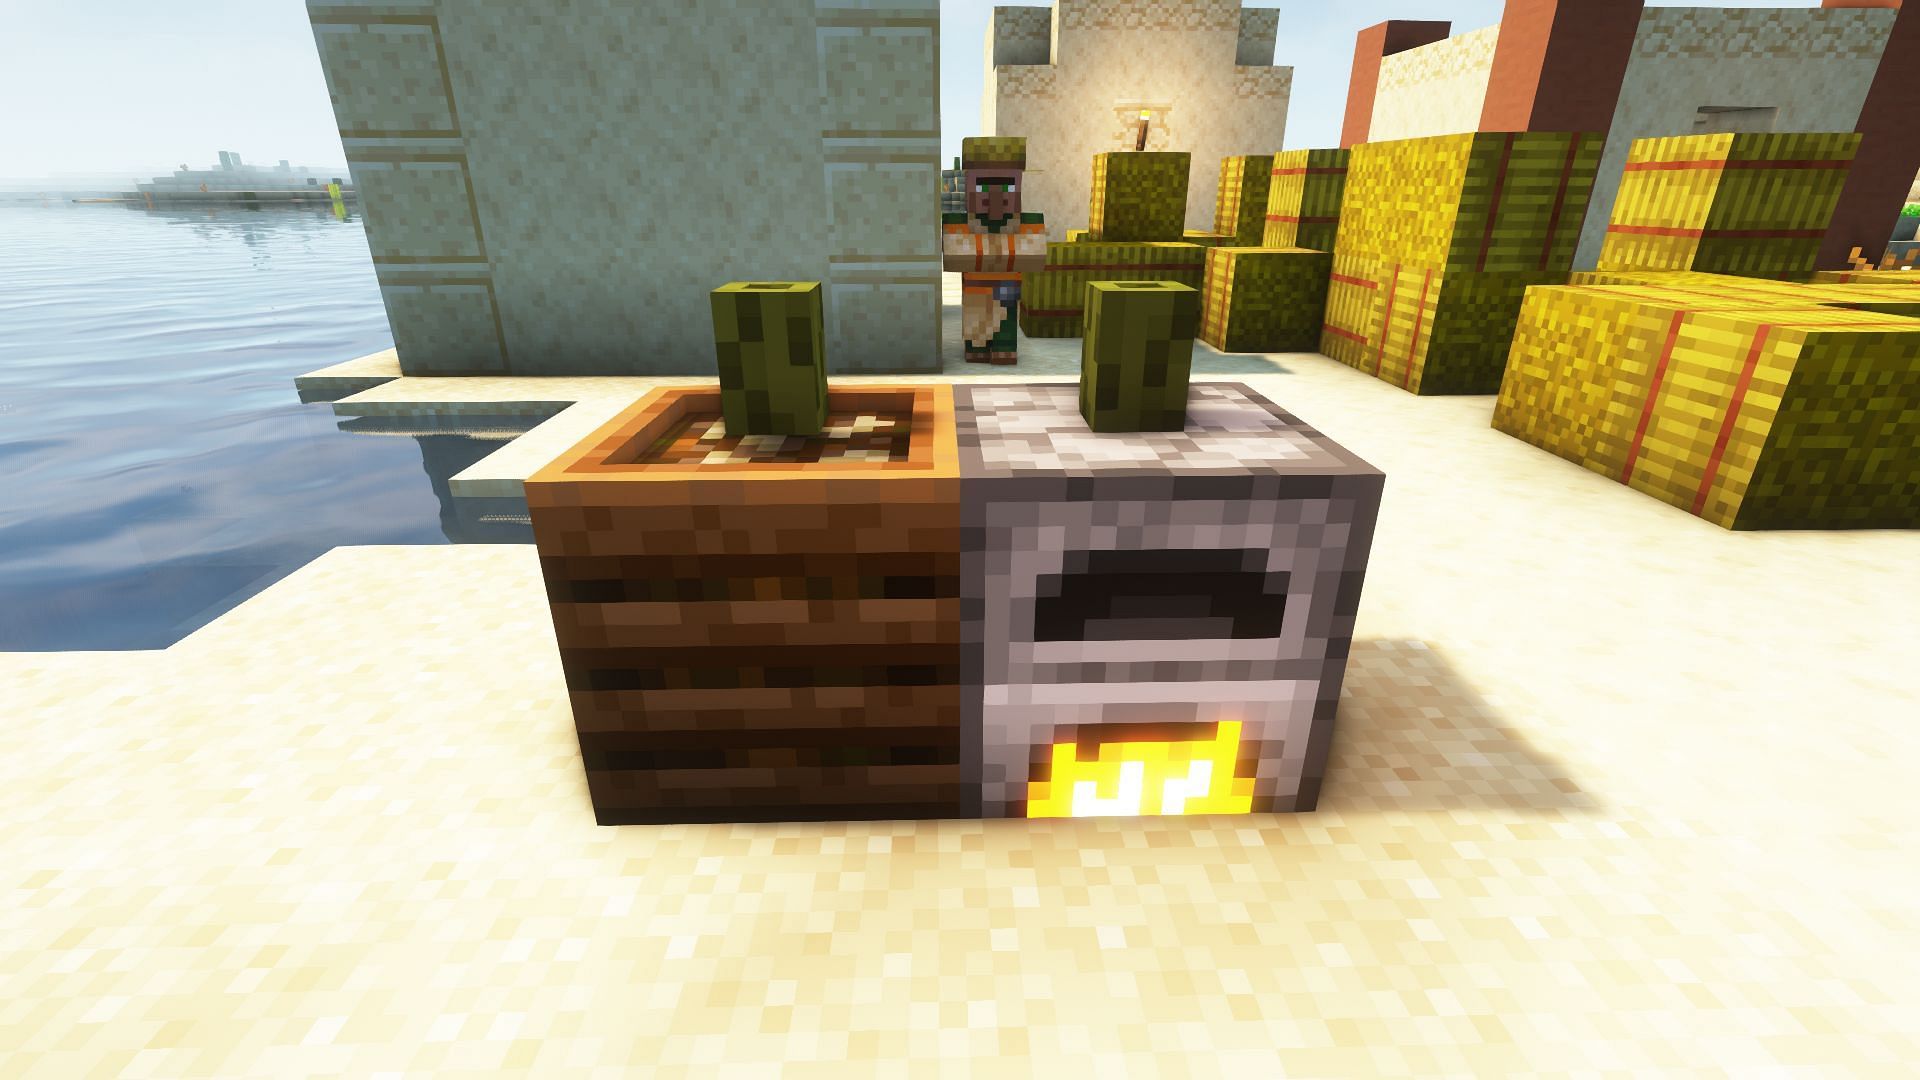 Sea pickles can be used in composters and furnaces (Image via Mojang)